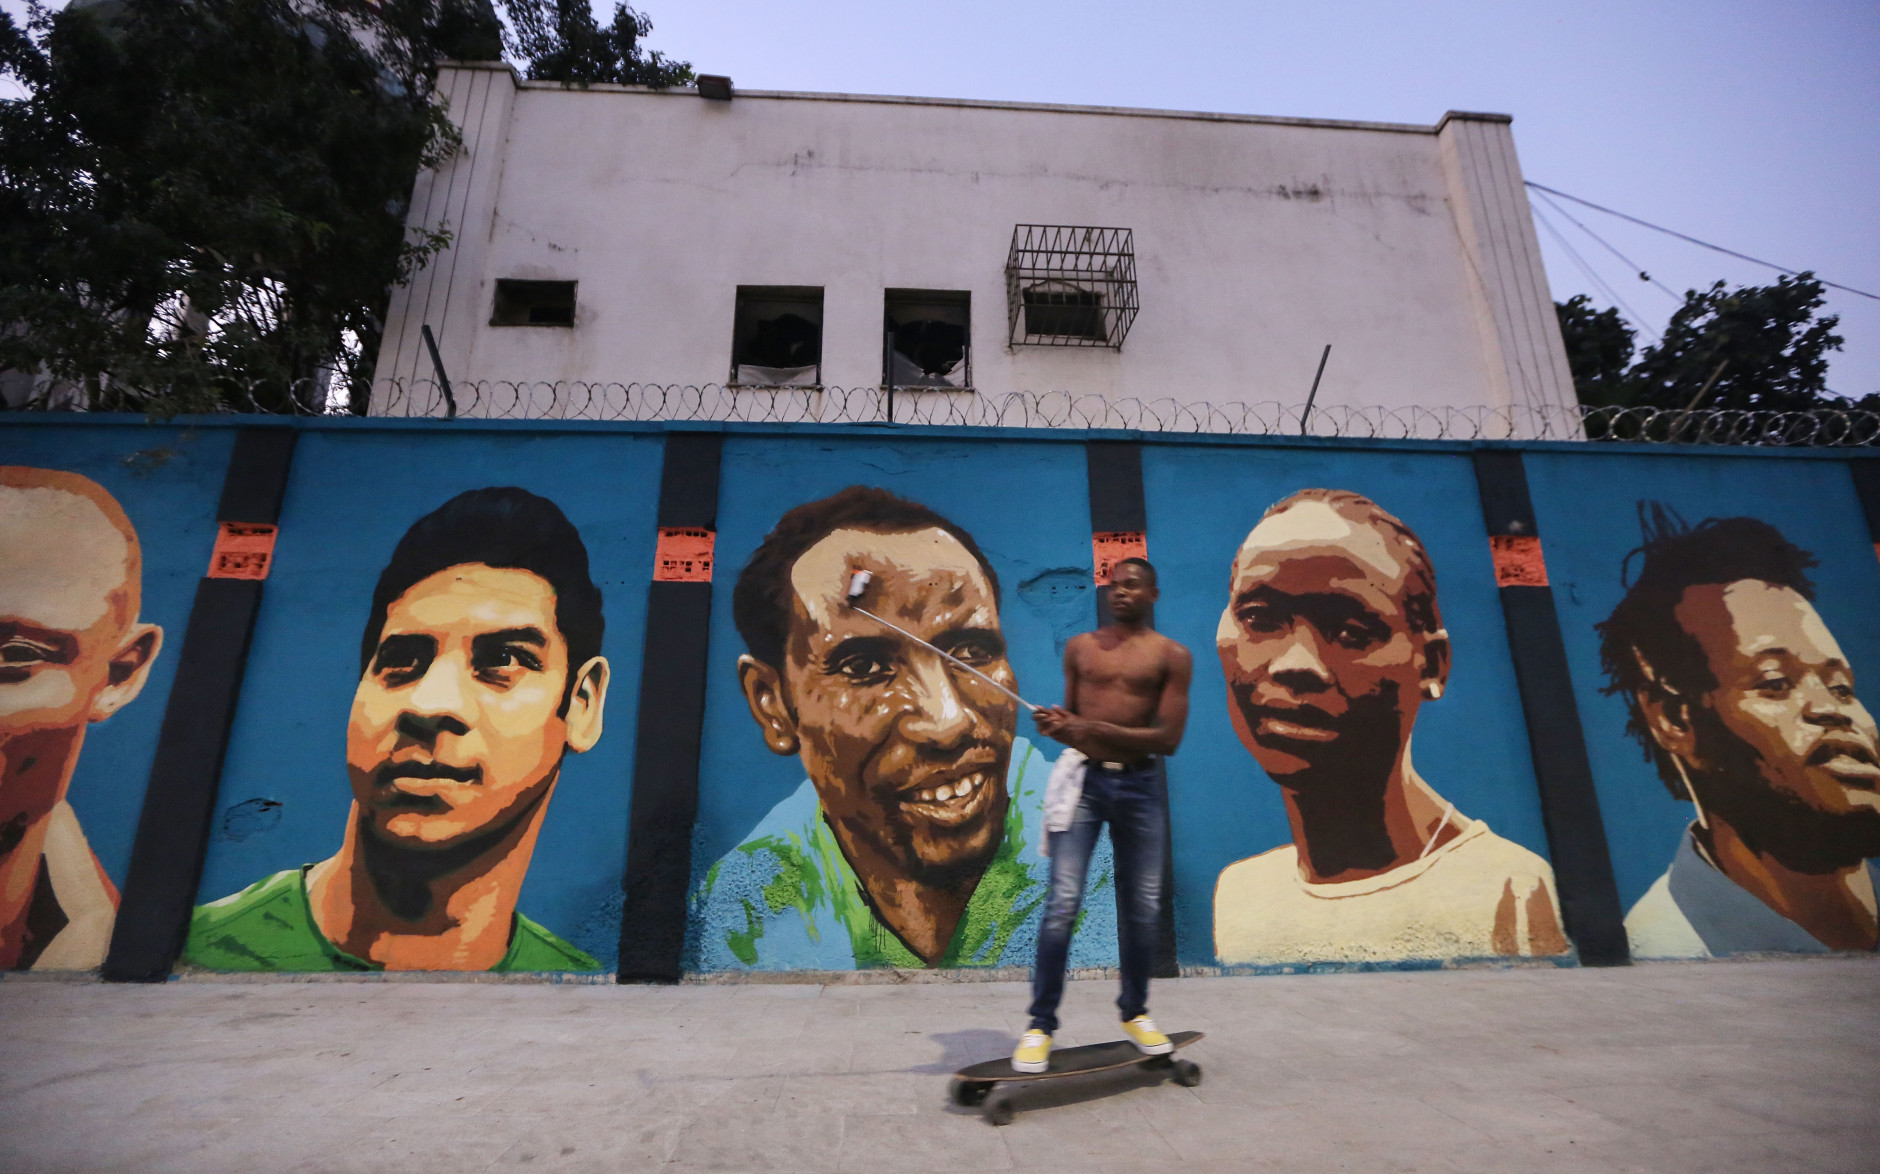 RIO DE JANEIRO, BRAZIL - AUGUST 17: A man skateboards while filming past a new mural of street art honoring the first Olympic refugee team during the Rio 2016 Olympic Games on August 17, 2016 in Rio de Janeiro, Brazil. The graffitti, created by the artists Rodrigo Sini and Cety Soledade, honors the stateless refugees, six men and four women, who hail from South Sudan, Syria, the Deomocratic Republic of Congo and Ethiopia. (Photo by Mario Tama/Getty Images)